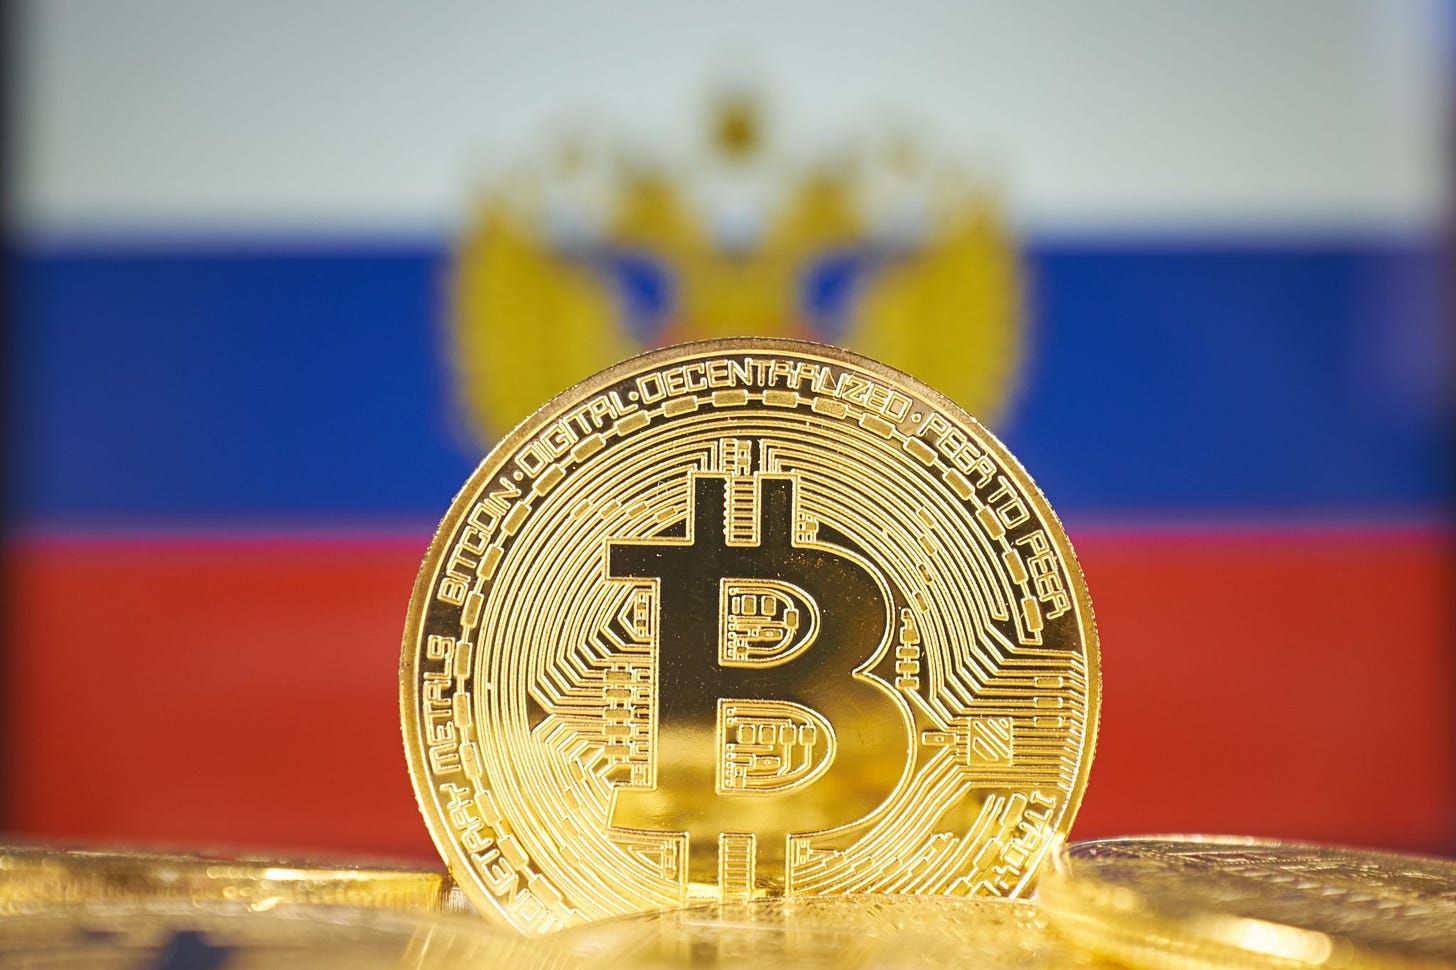 https://www.cointribune.com/app/uploads/2021/07/bitcoin-new-virtual-money-and-russia-flag-conceptual-image-for-investors-stockpack-deposit-photos-scaled.jpg